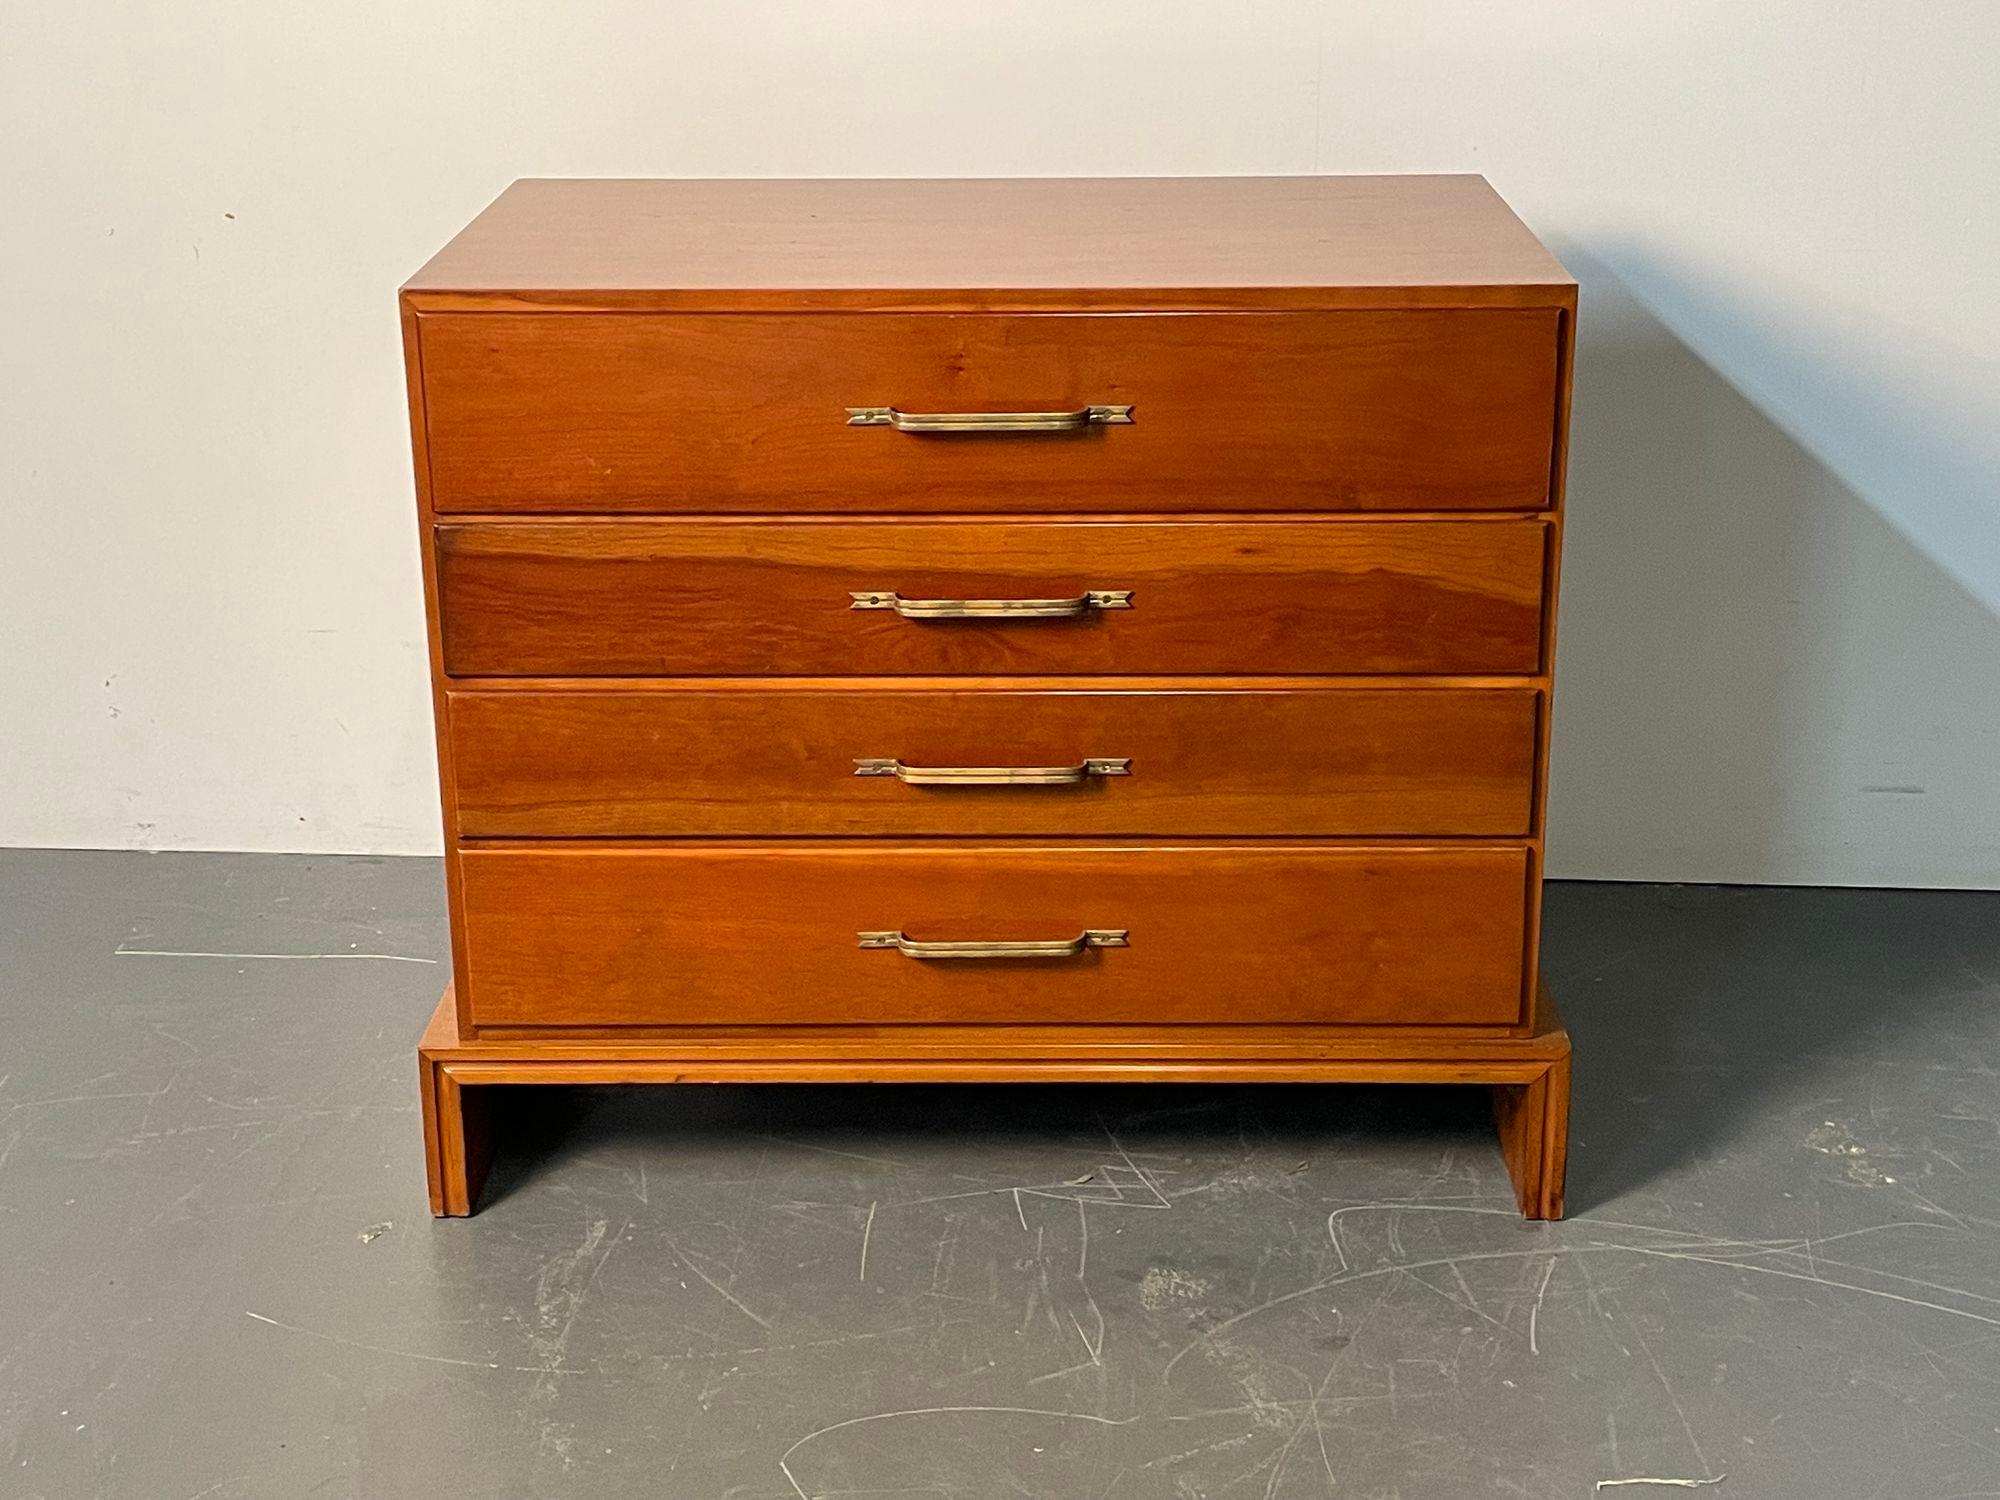 Mid-Century Modern Chest / Dresser, Tommi Parzinger for Charak Modern, Cherry
Having four graduating drawers on bracket feet. Perfect from a Bedside Stand or End Table. Unsigned. 
30.25H x 34W x 20.5D
 
ISXA